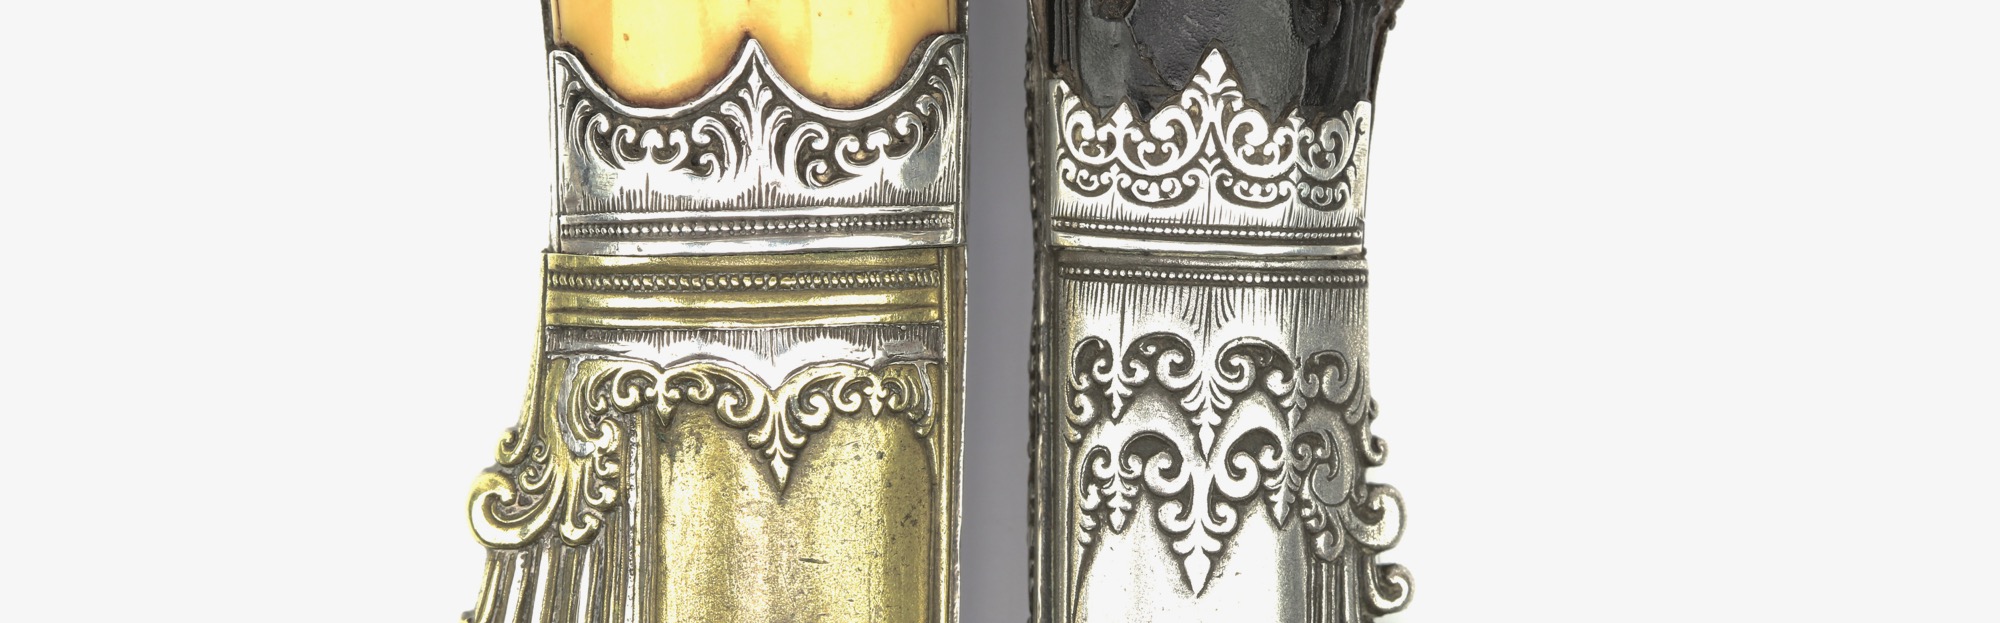 Lotus bud elements on Sinhalese knives